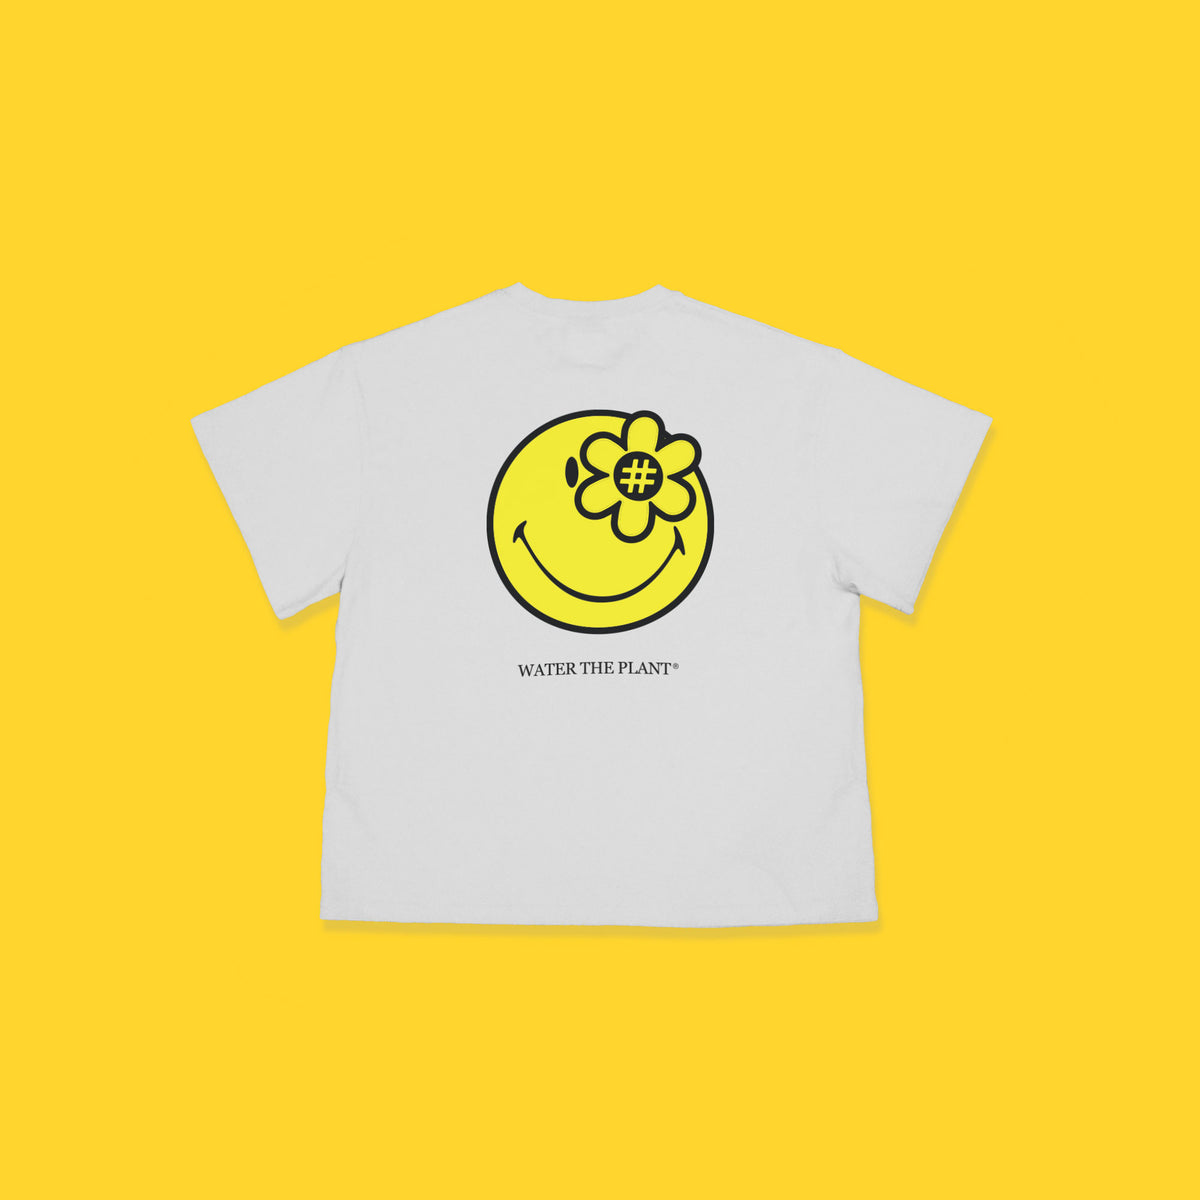 Smiley Play Safe T-Shirt | White